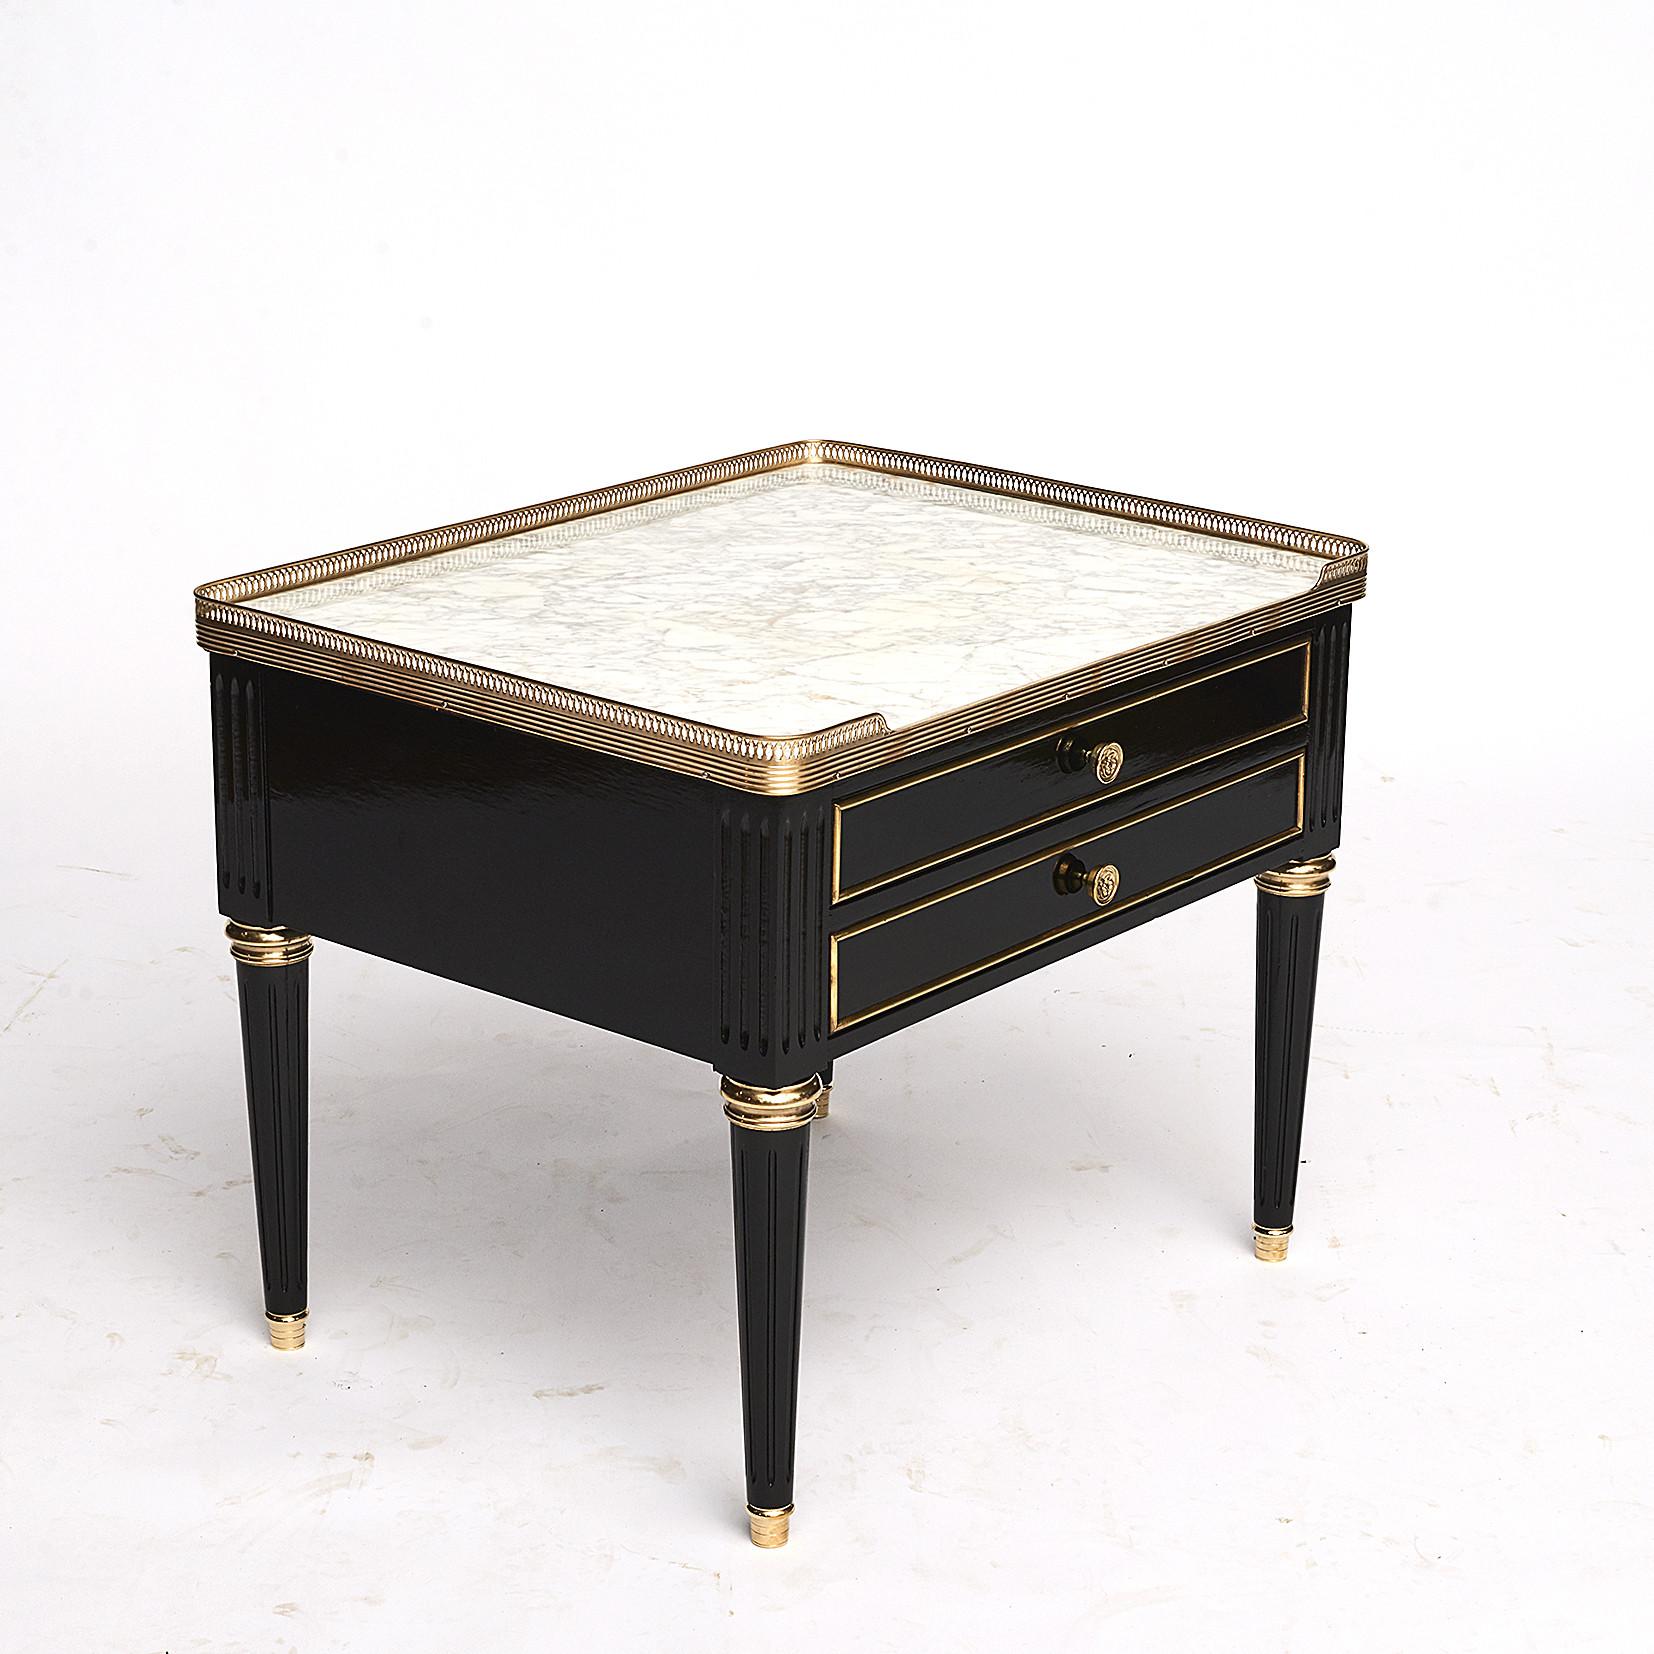 Pair of French Louis XVI style side tables or nightstands in ebonized mahogany with beautiful Carrara marble tops and pierced brass gallery rails. Two drawers with brass trim and knobs, elegant tapered legs.
France, circa 1970.